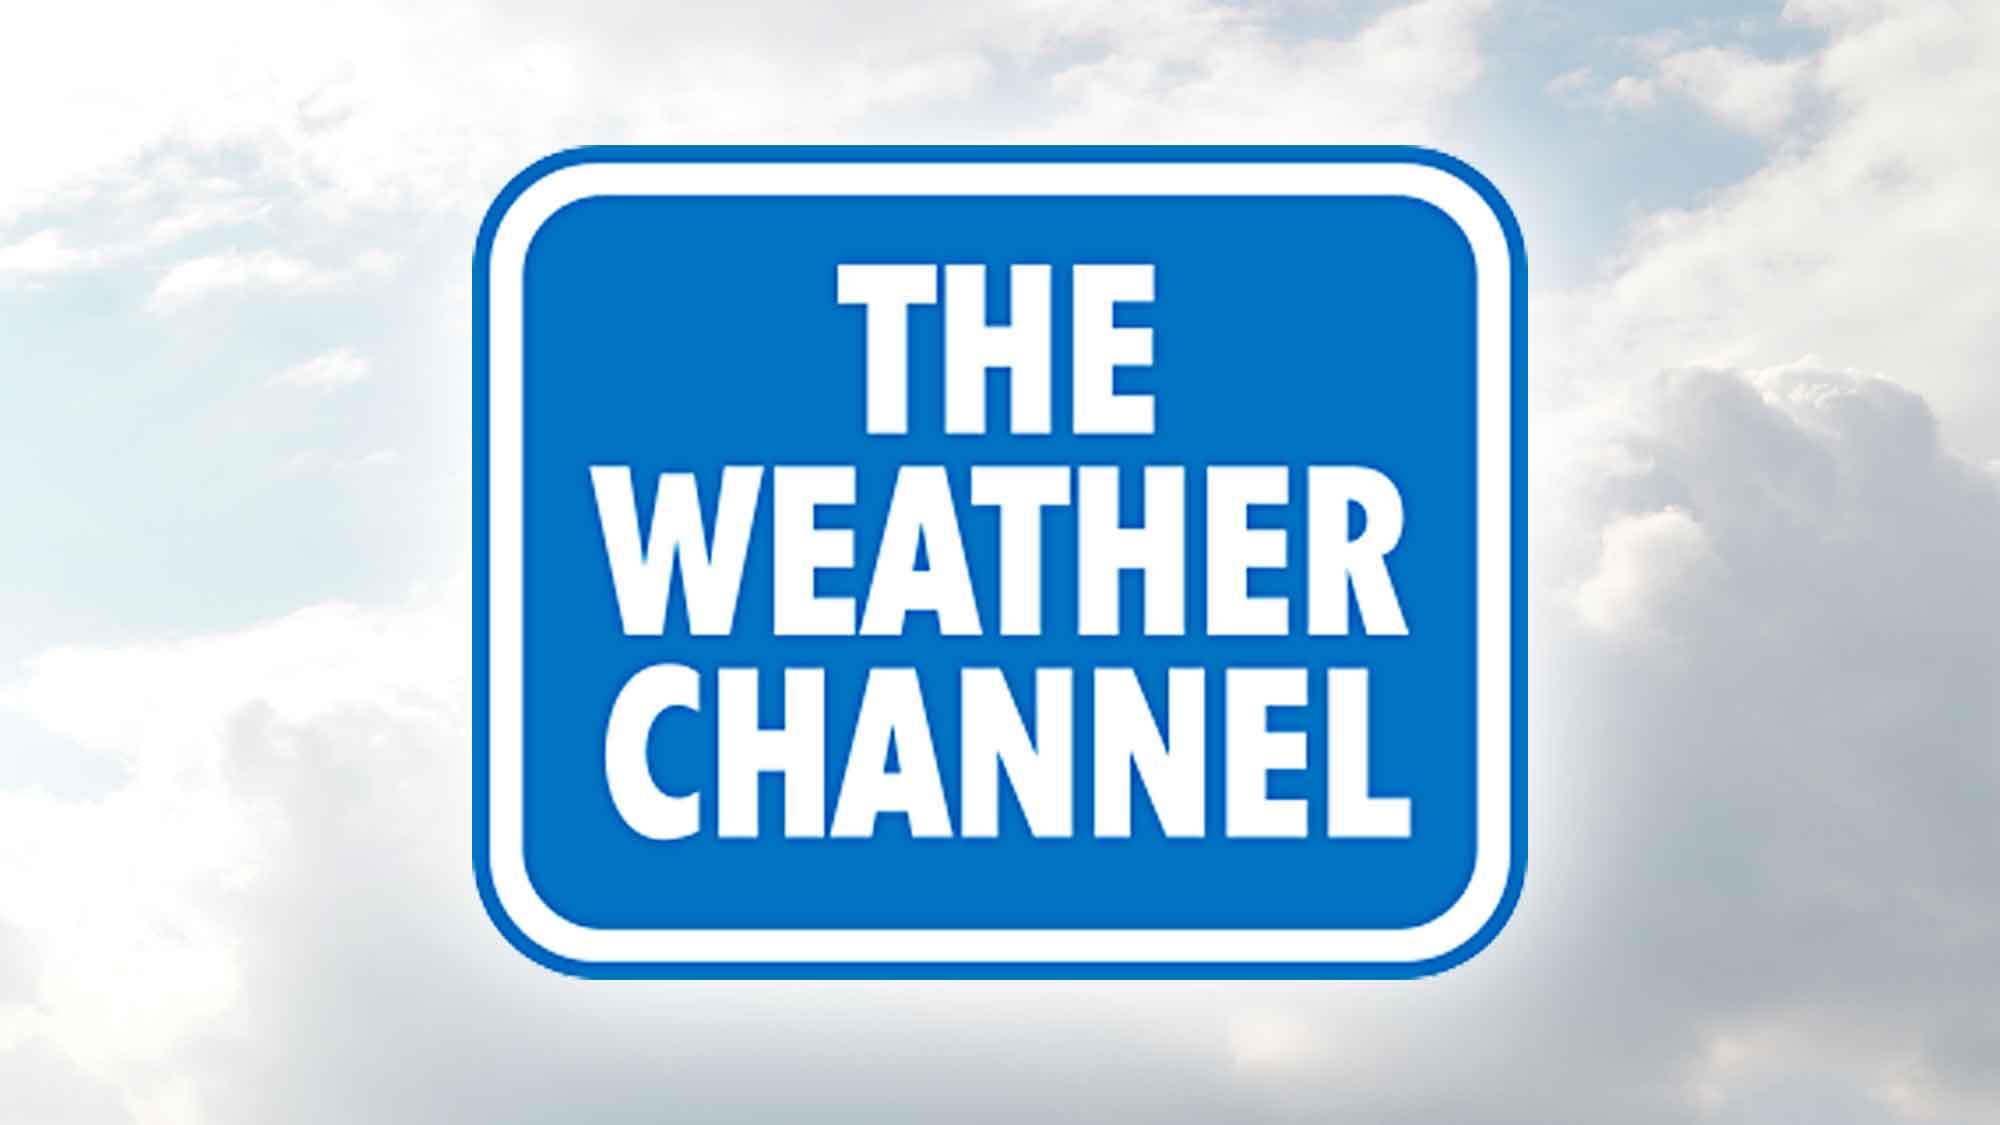 How The Weather Channel Secured Weather.com And Grew Into A Web Giant